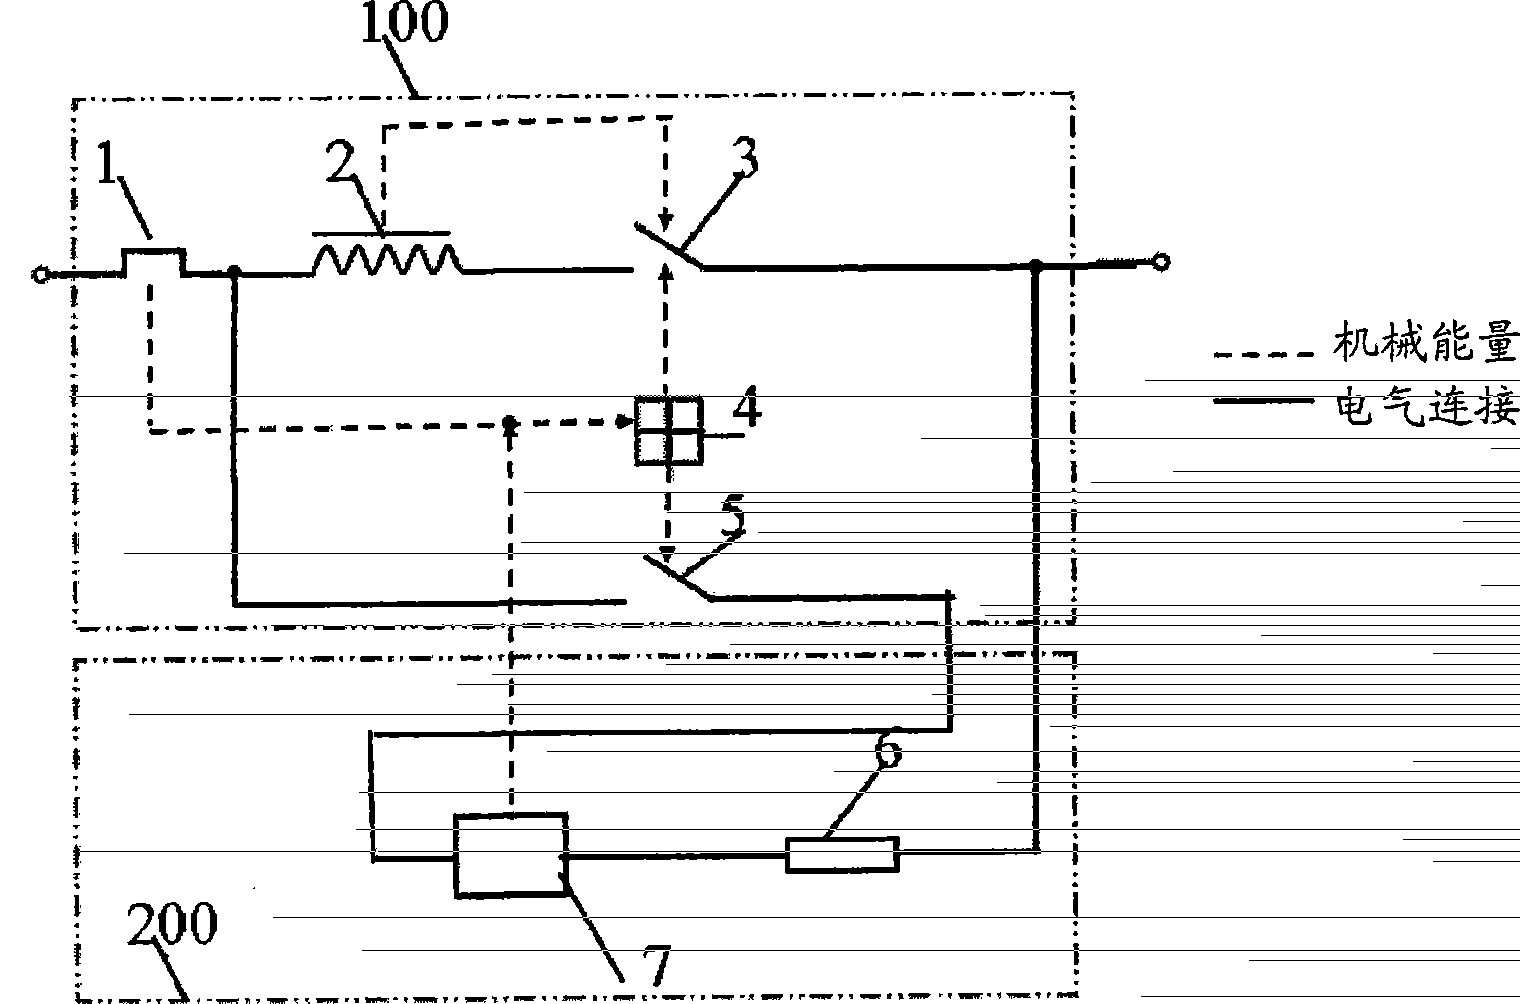 Circuit breaker with selectivity